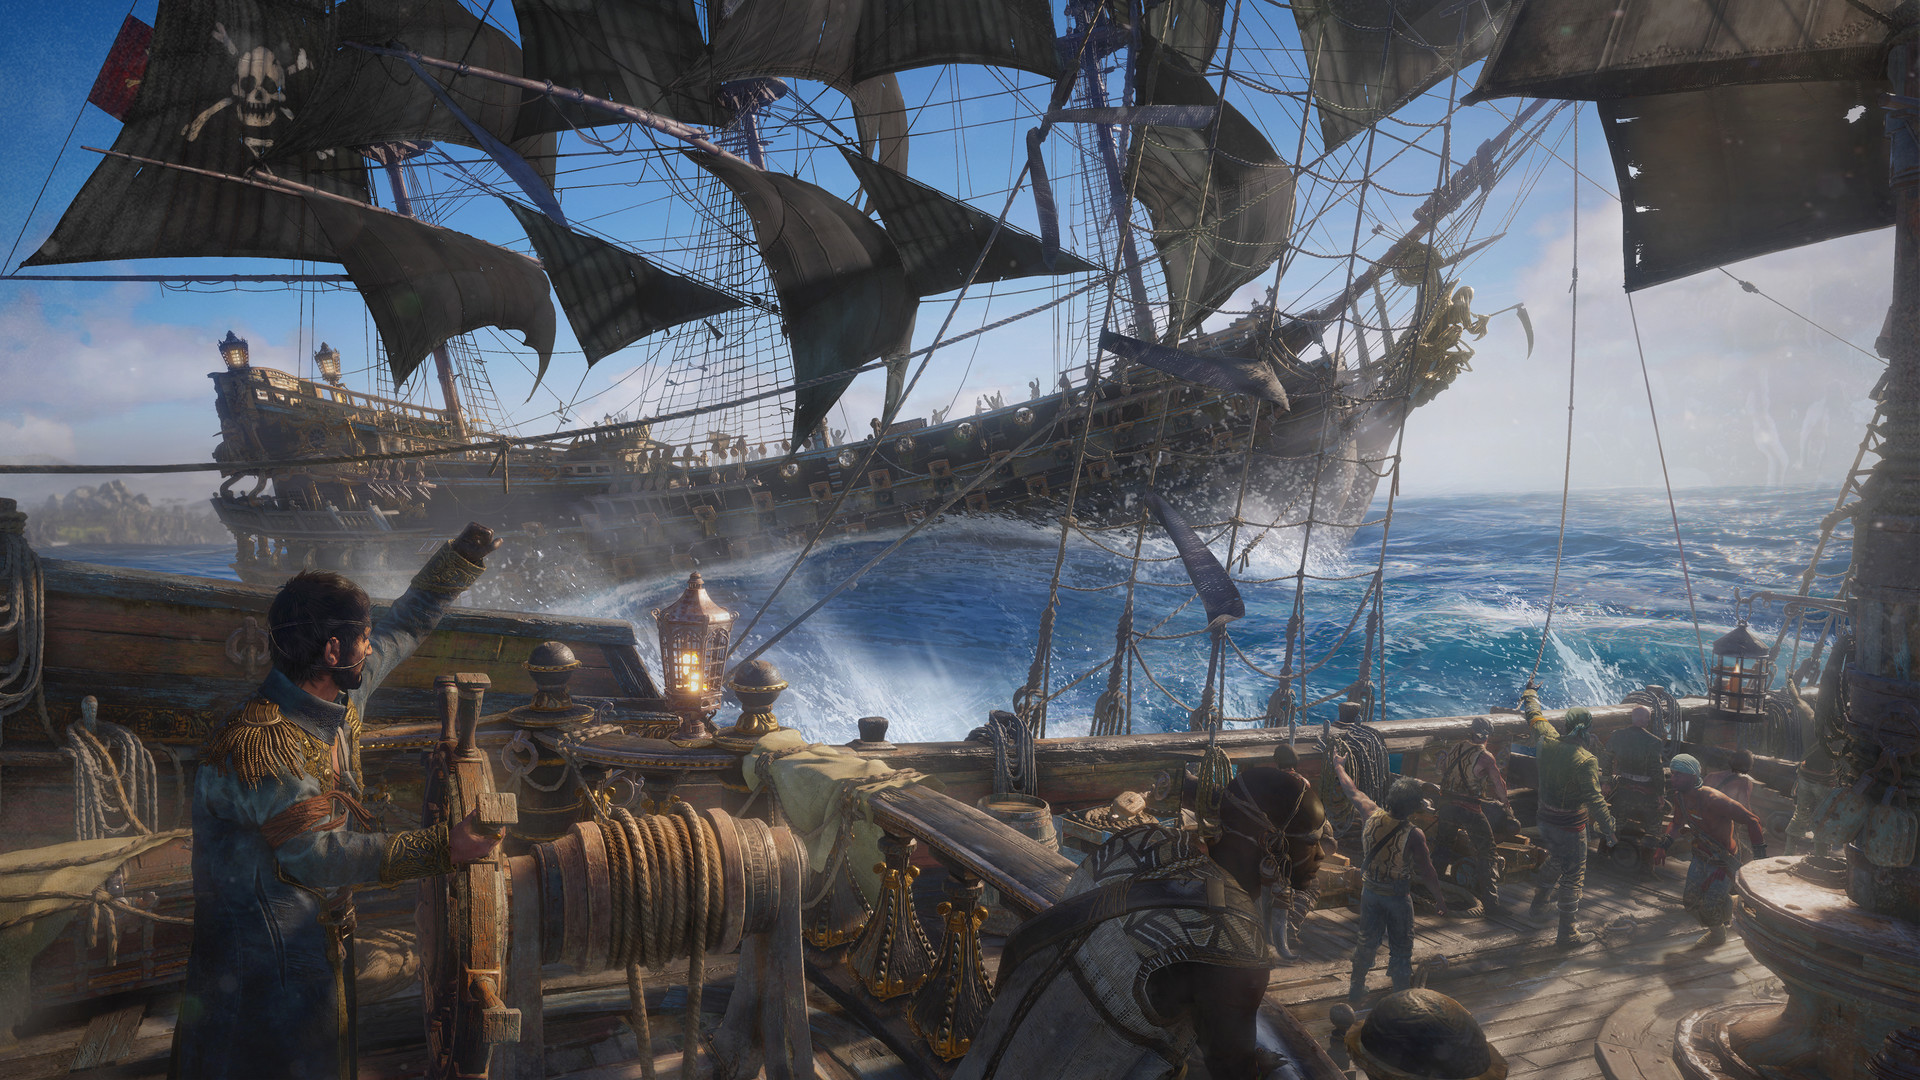 Skull and Bones System Requirements